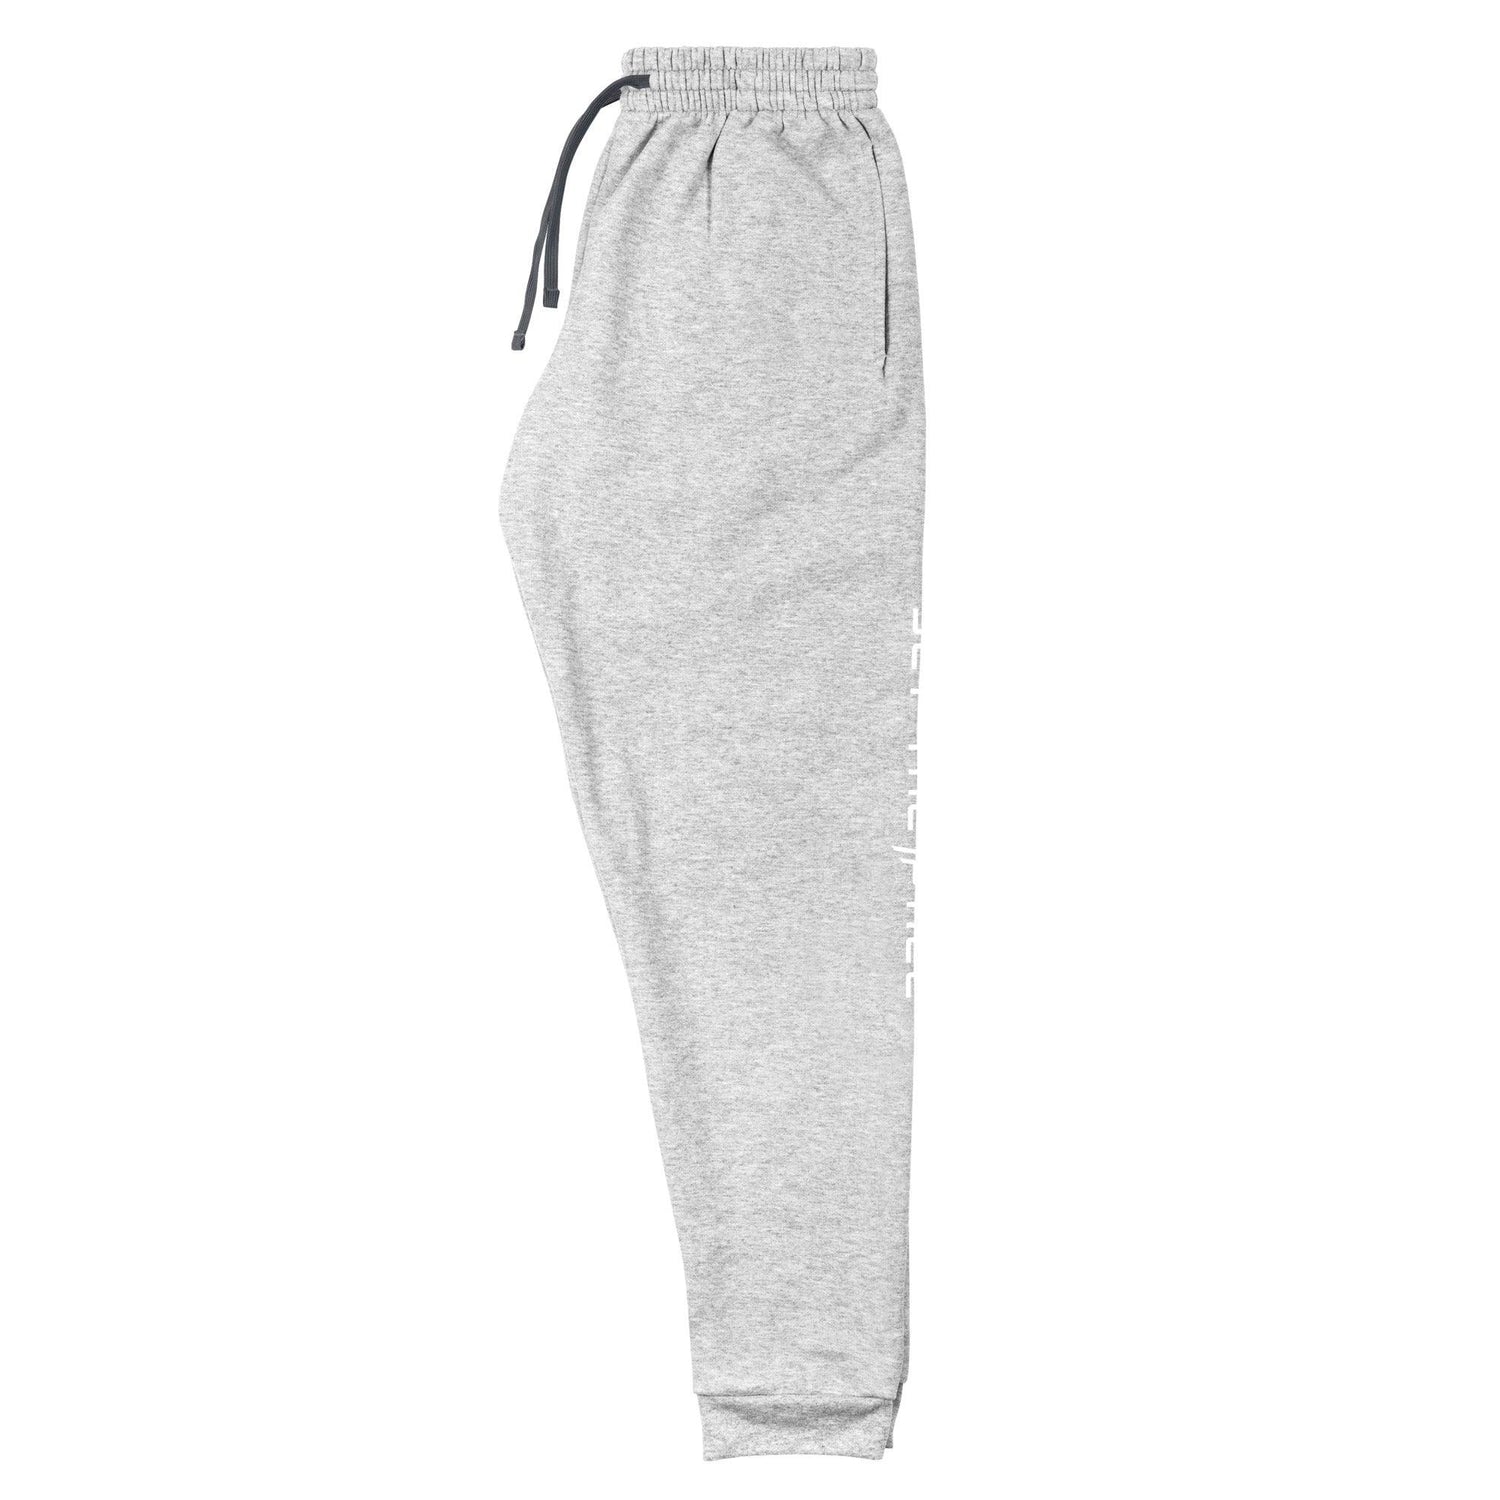 Court Prowess "Set The Pace" Joggers - Fan Arch